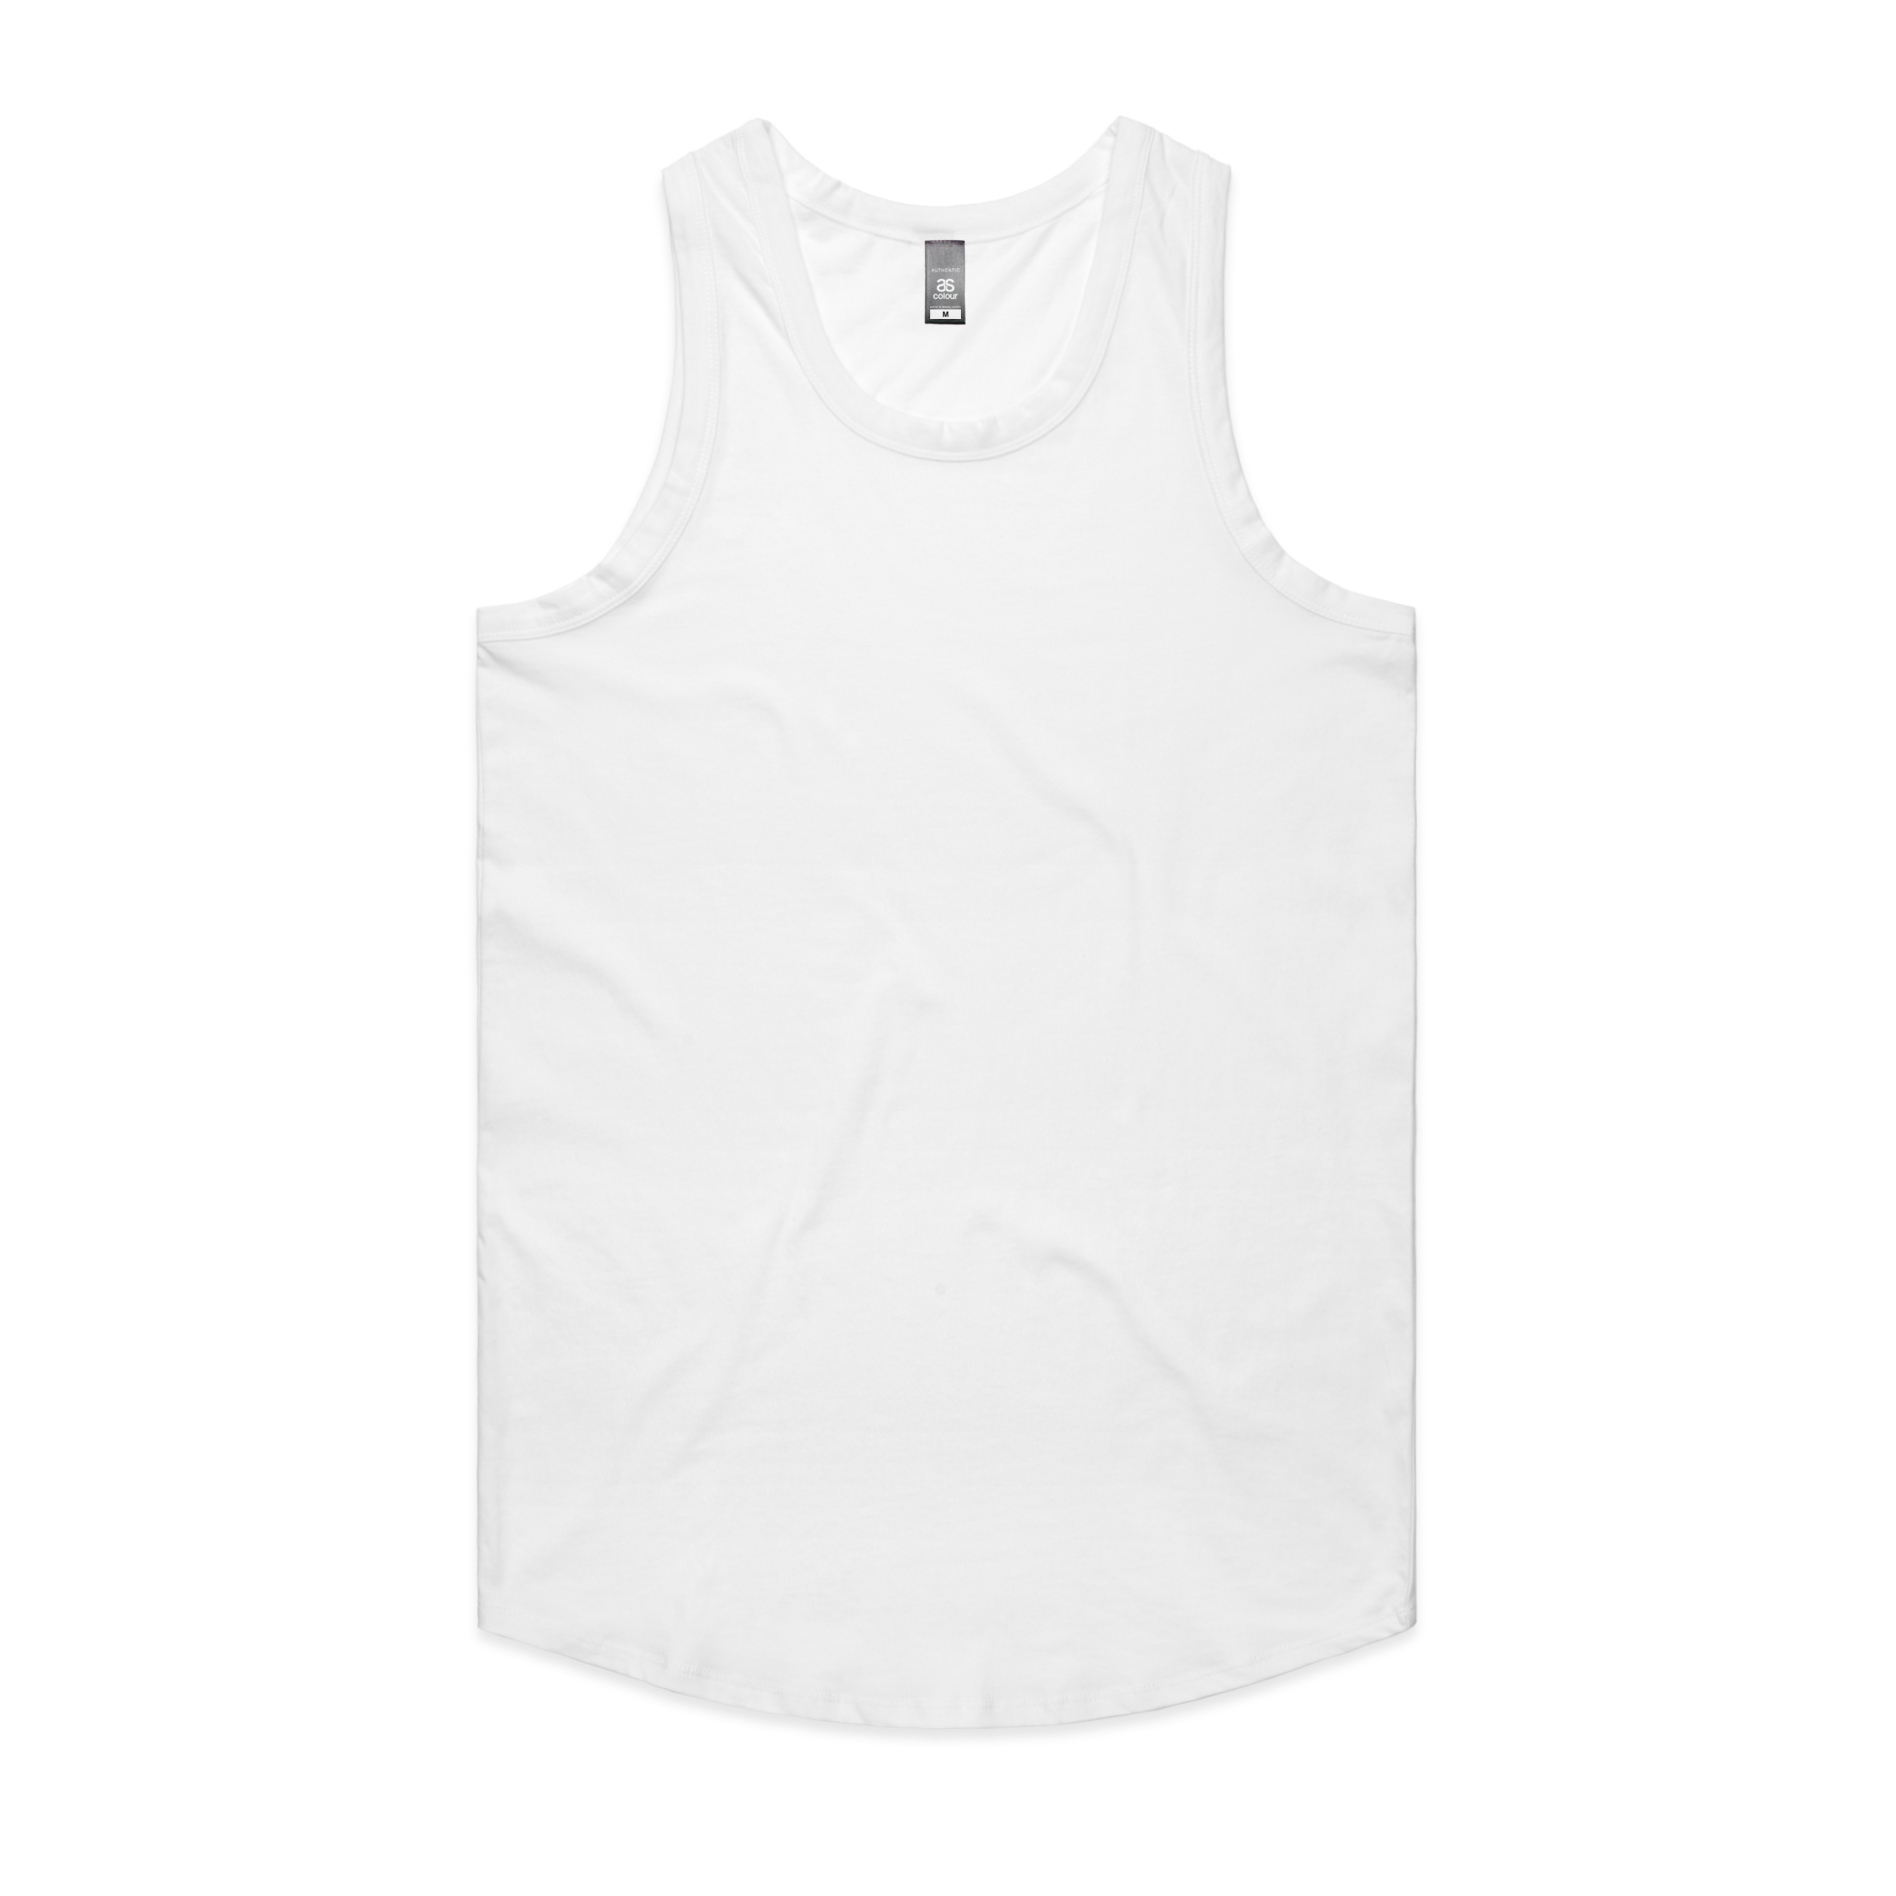 Authentic Singlet - Image Group